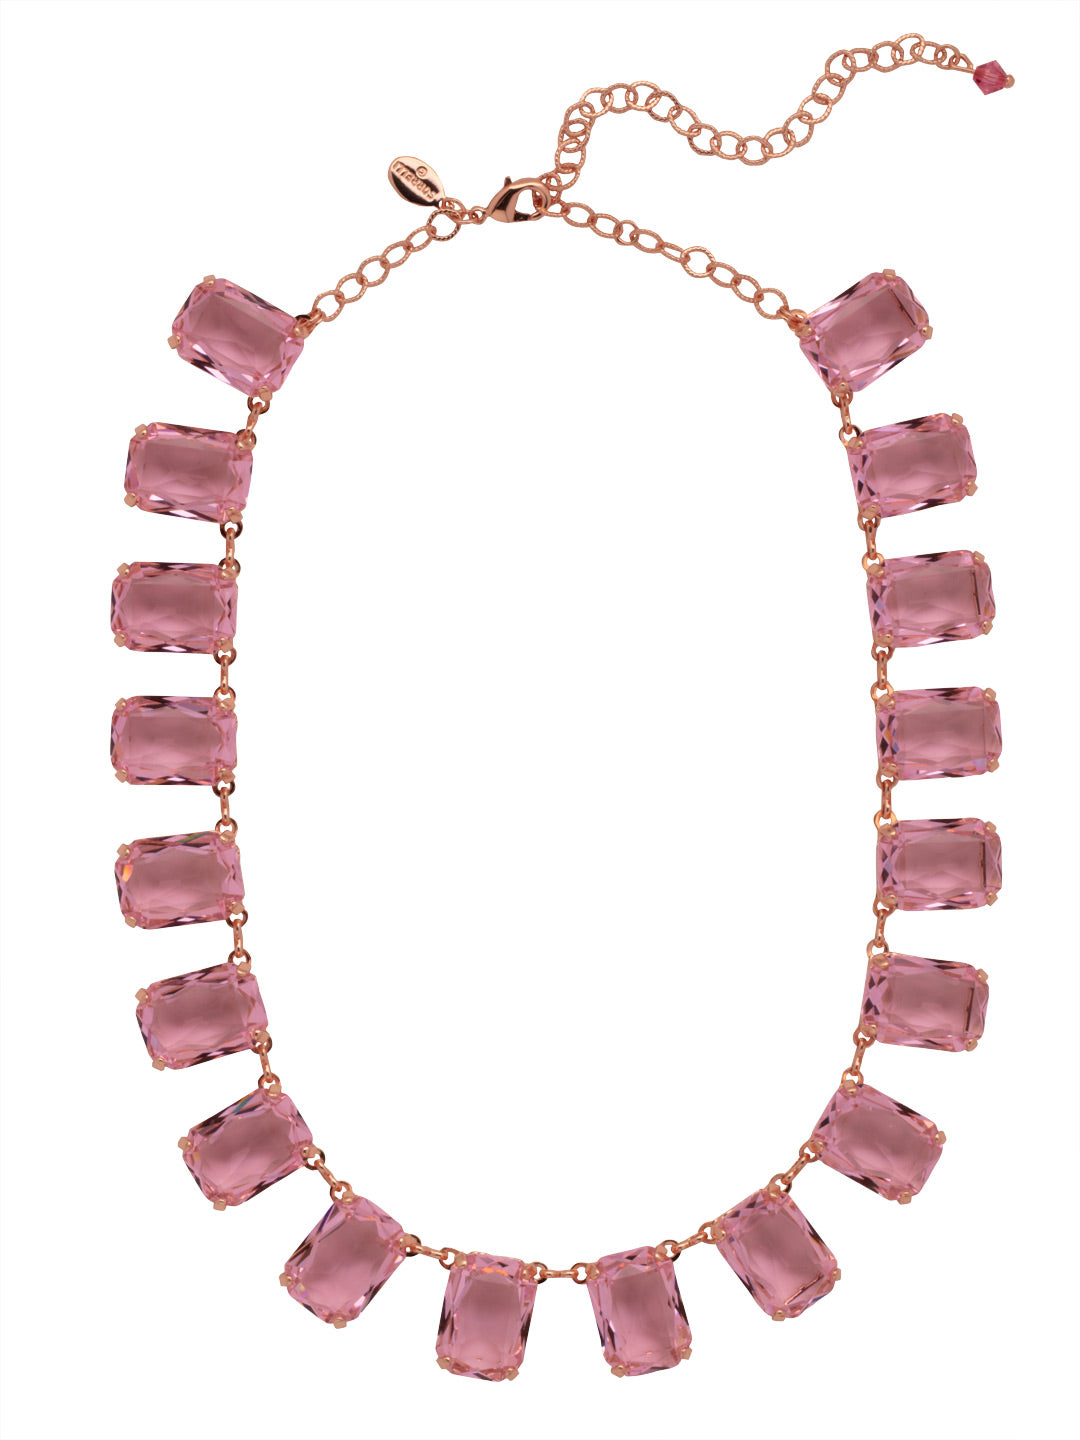 Julianna Emerald Statement Necklace - NFD77RGPPN - <p>The Julianna Emerald Statement Necklace features a row of octagon cut candy drop crystals around an adjustable chain, secured with a lobster claw clasp. From Sorrelli's Pink Pineapple collection in our Rose Gold-tone finish.</p>